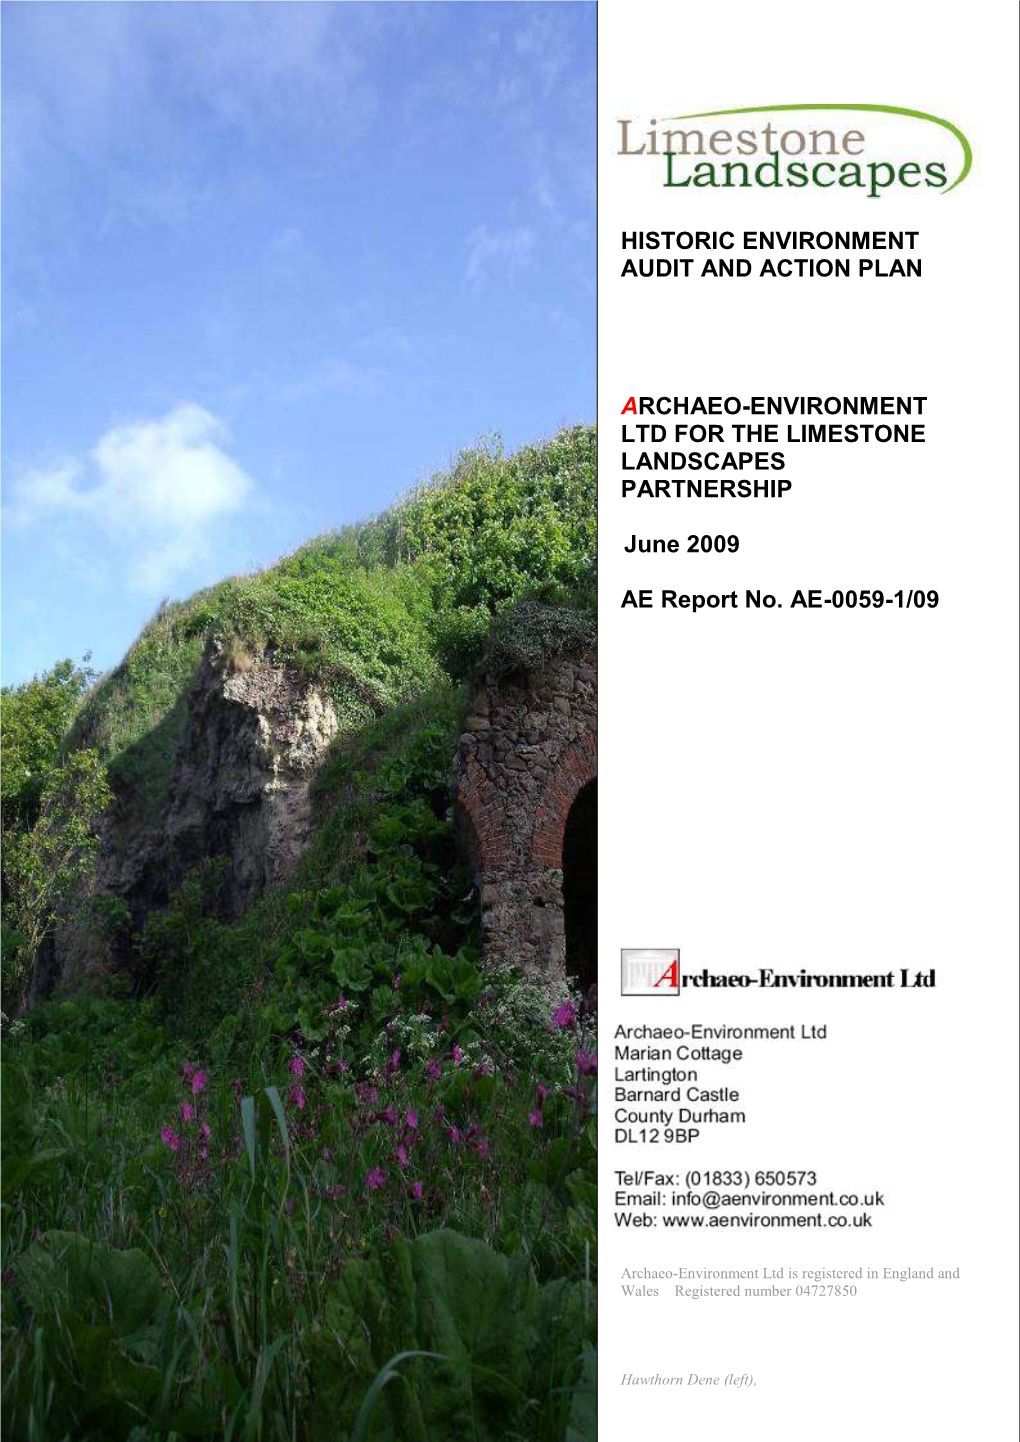 Limestone Landscapes Historic Environment Audit and Action Plan